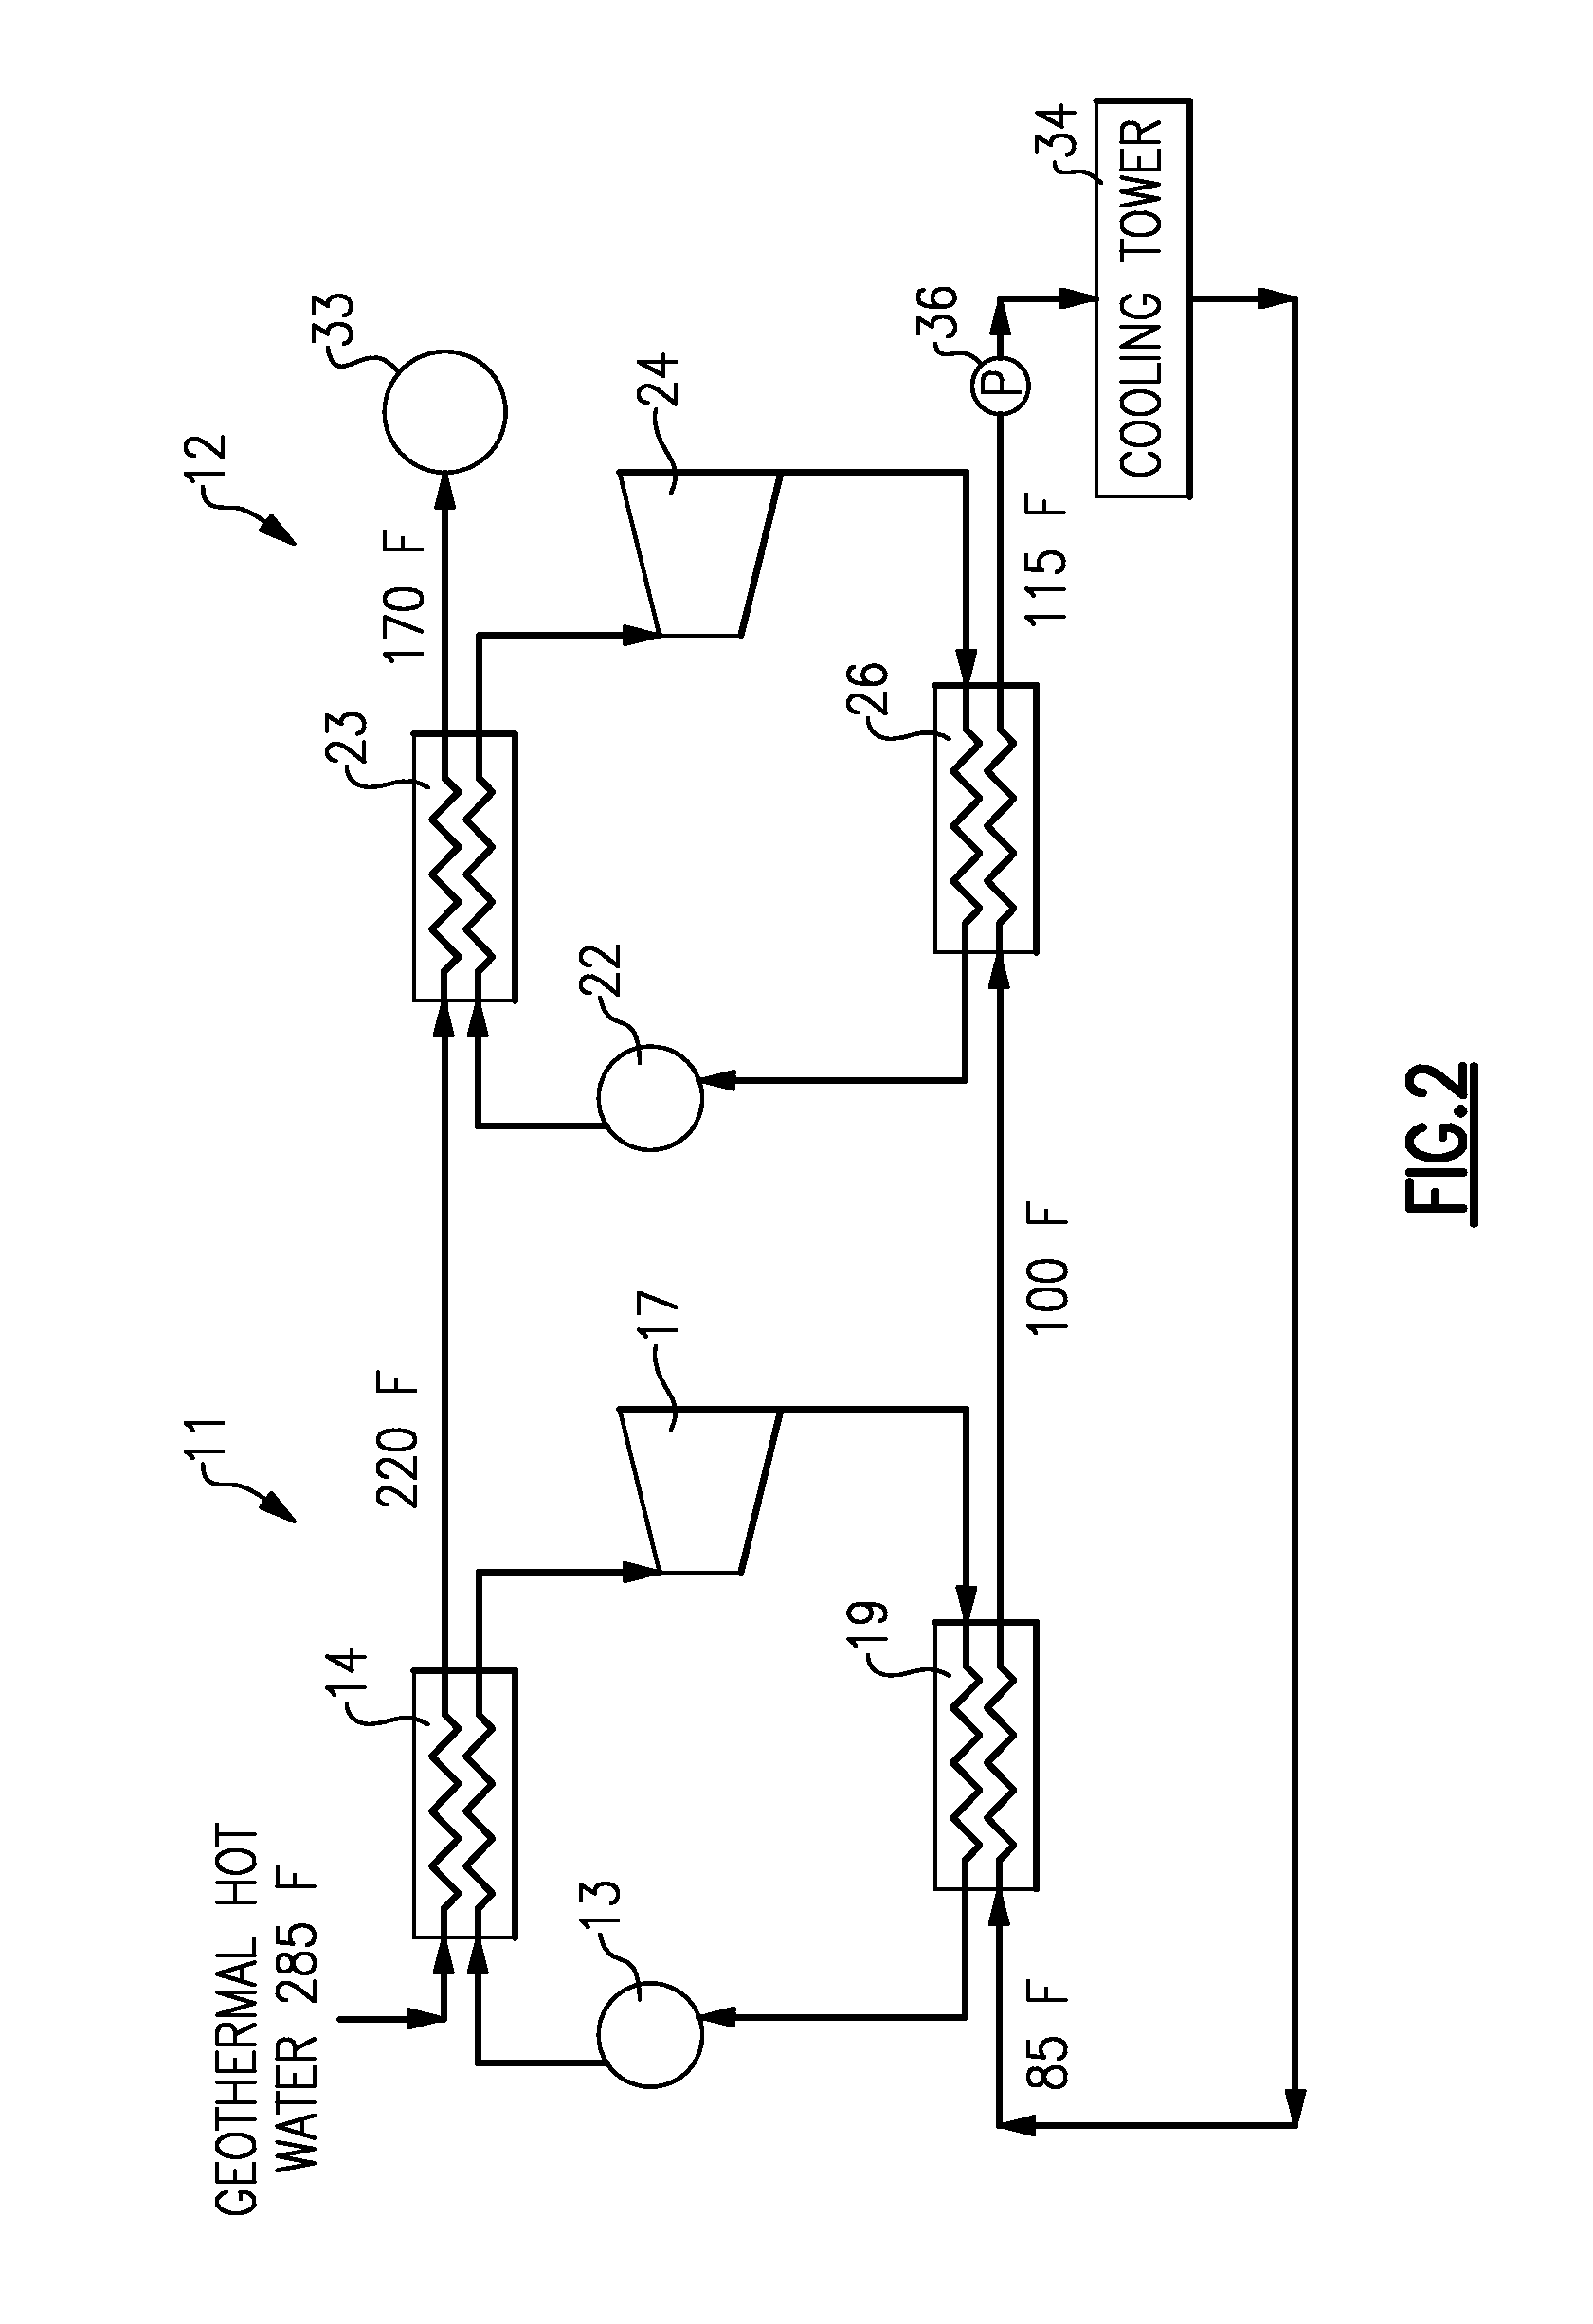 Cascaded condenser for multi-unit geothermal orc